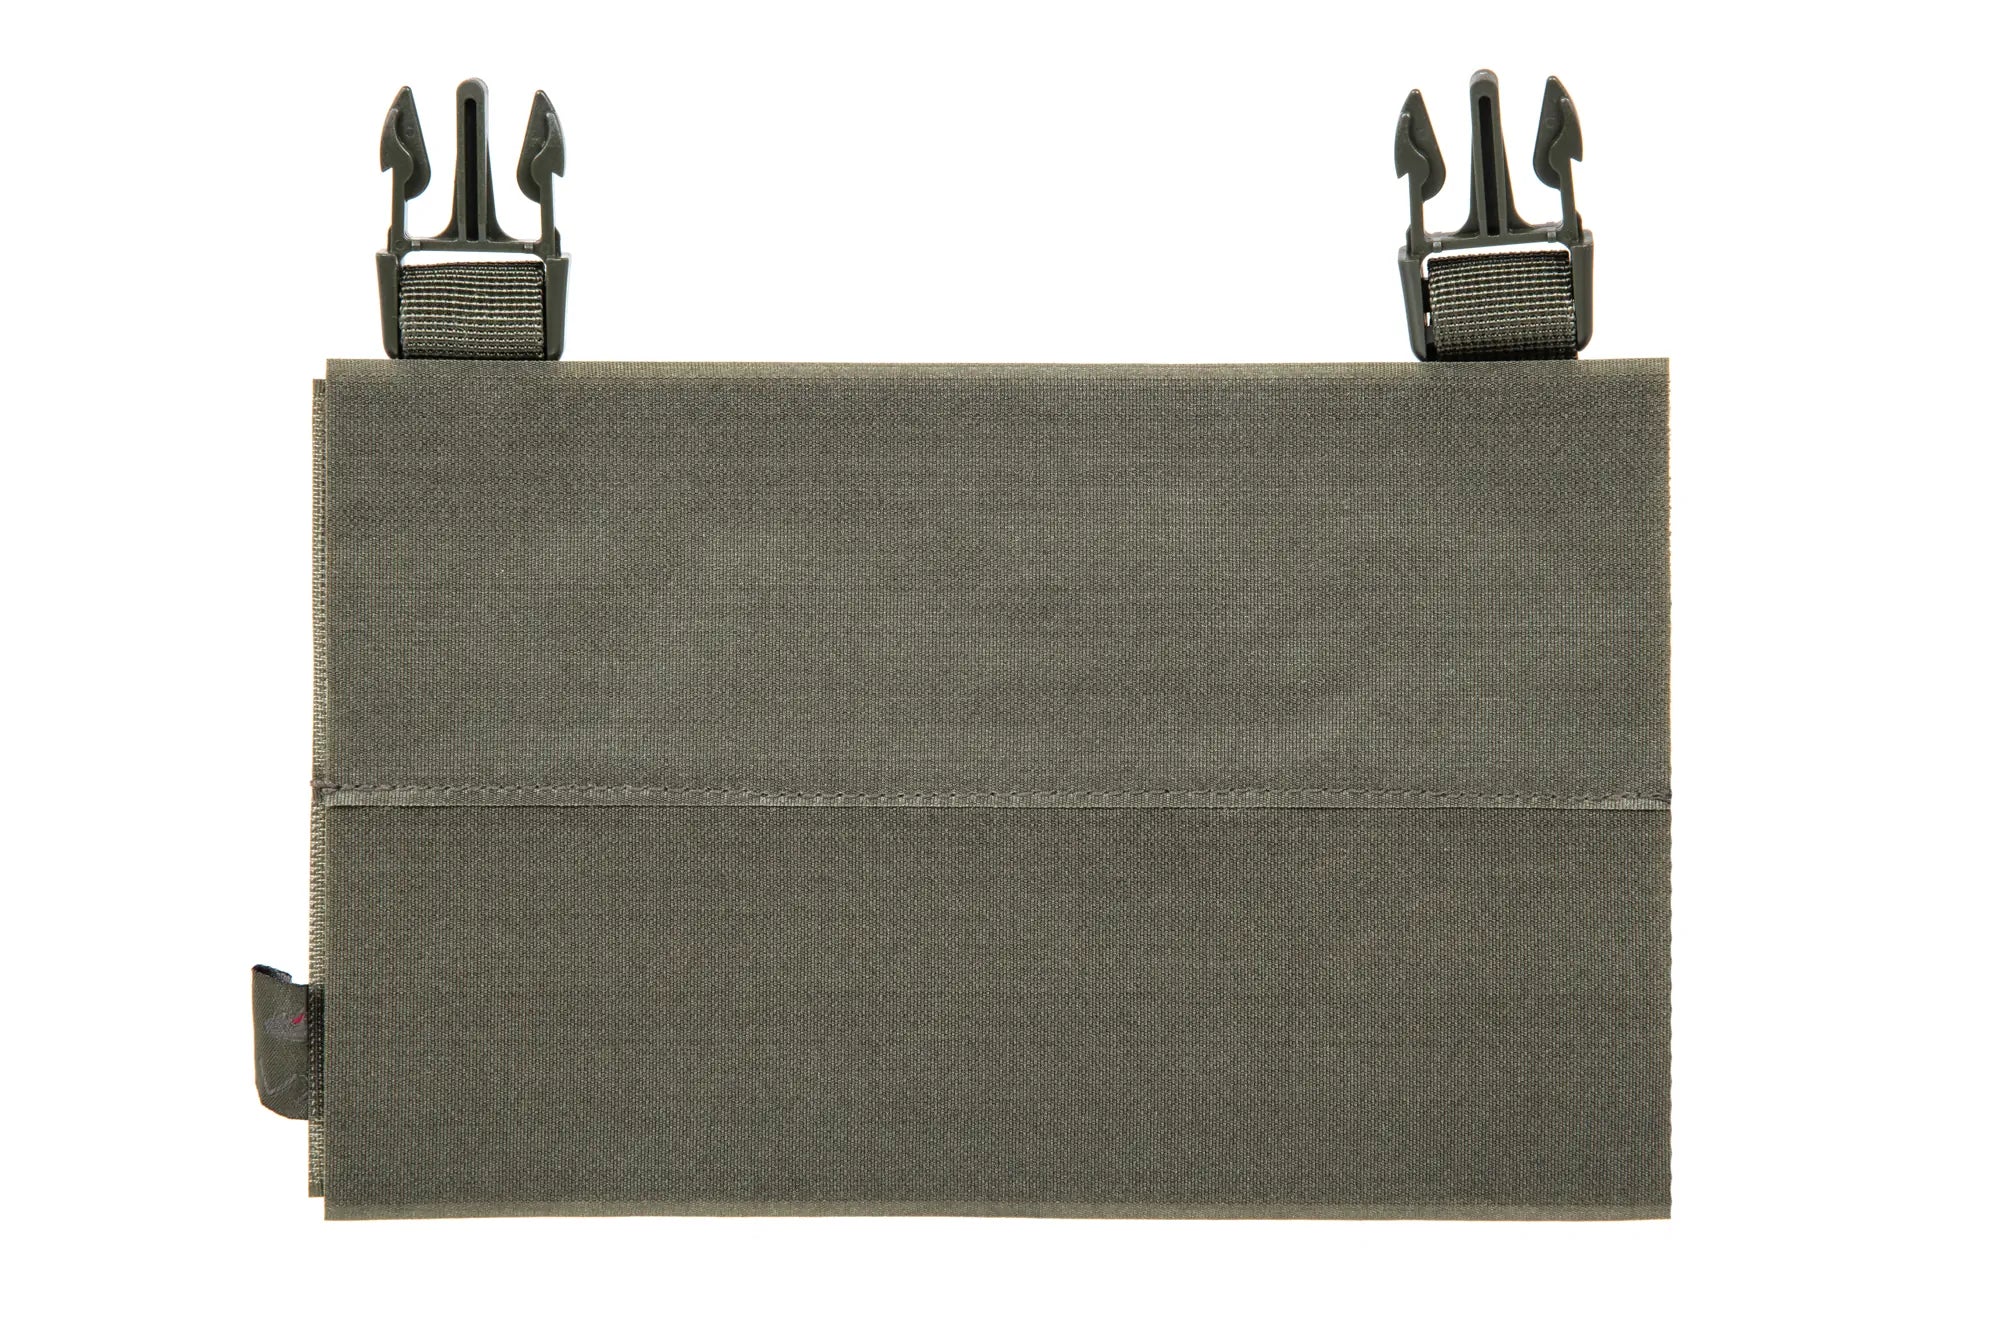 Viper Tactical VX buckle up panel for 3 AR/AK magazines - Olive